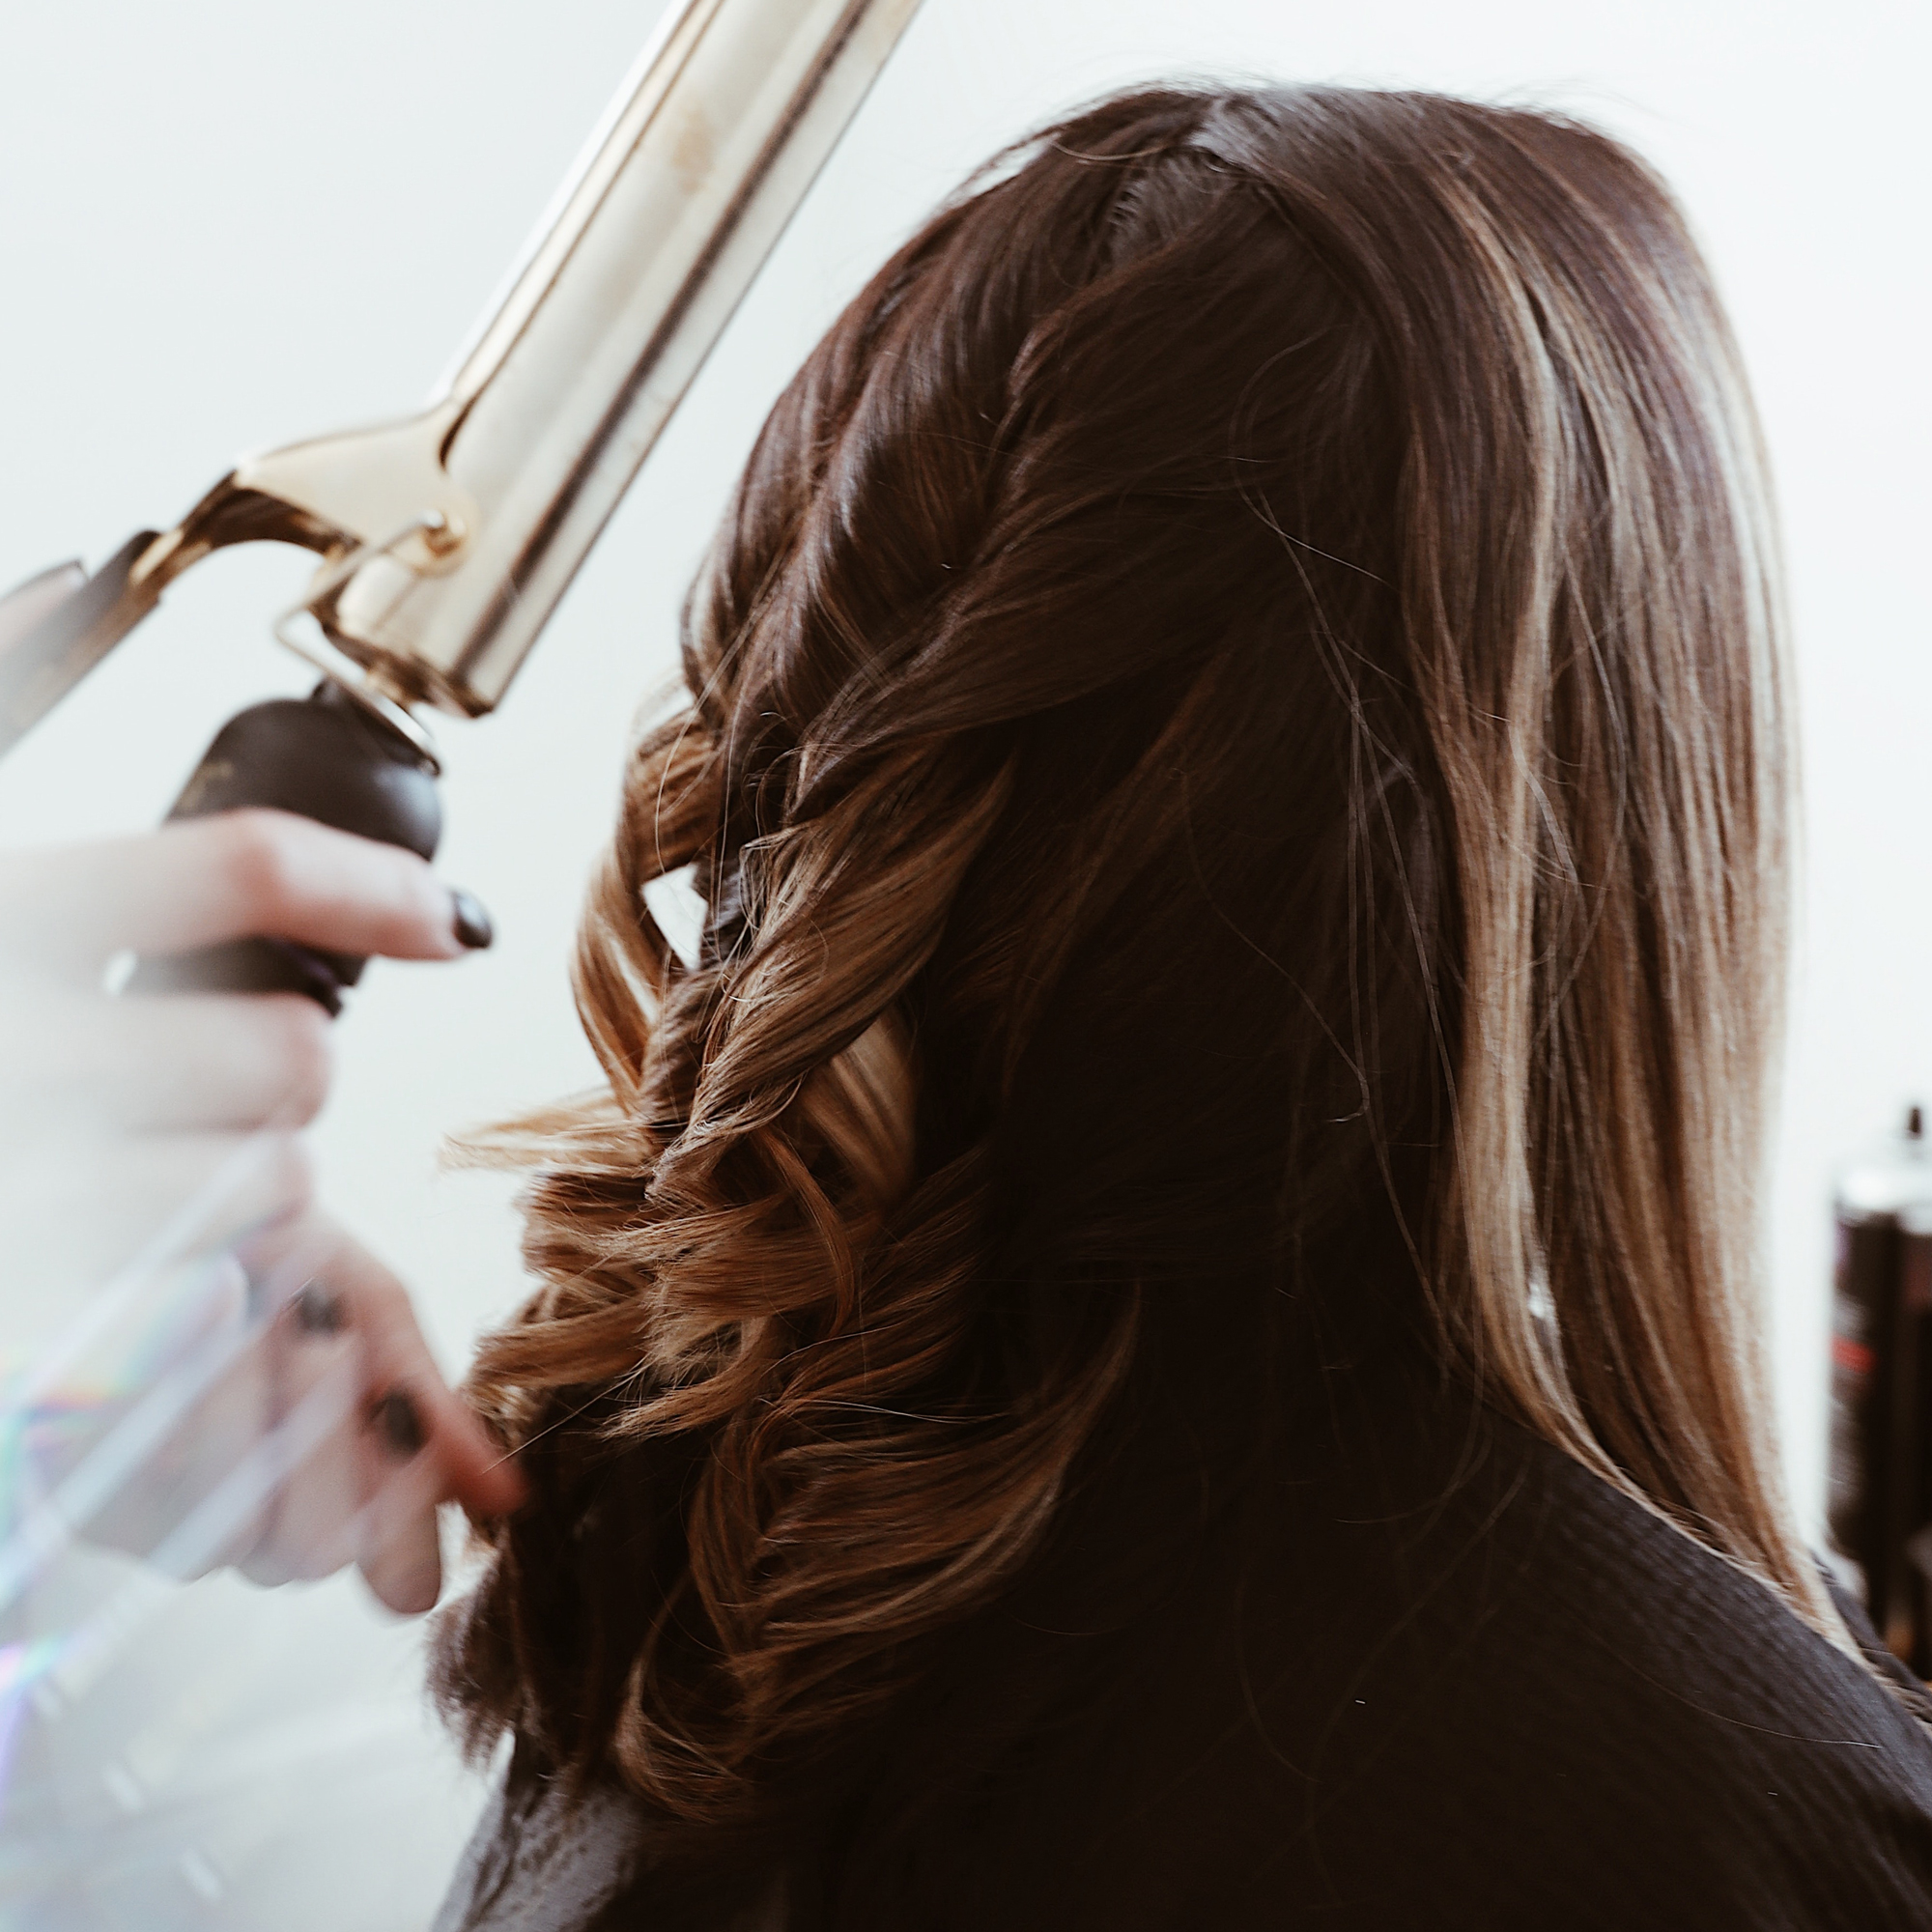 10-Mother-of-the-Bride-Hairstyle-Ideas-for-the-Big-Day-Unsplash